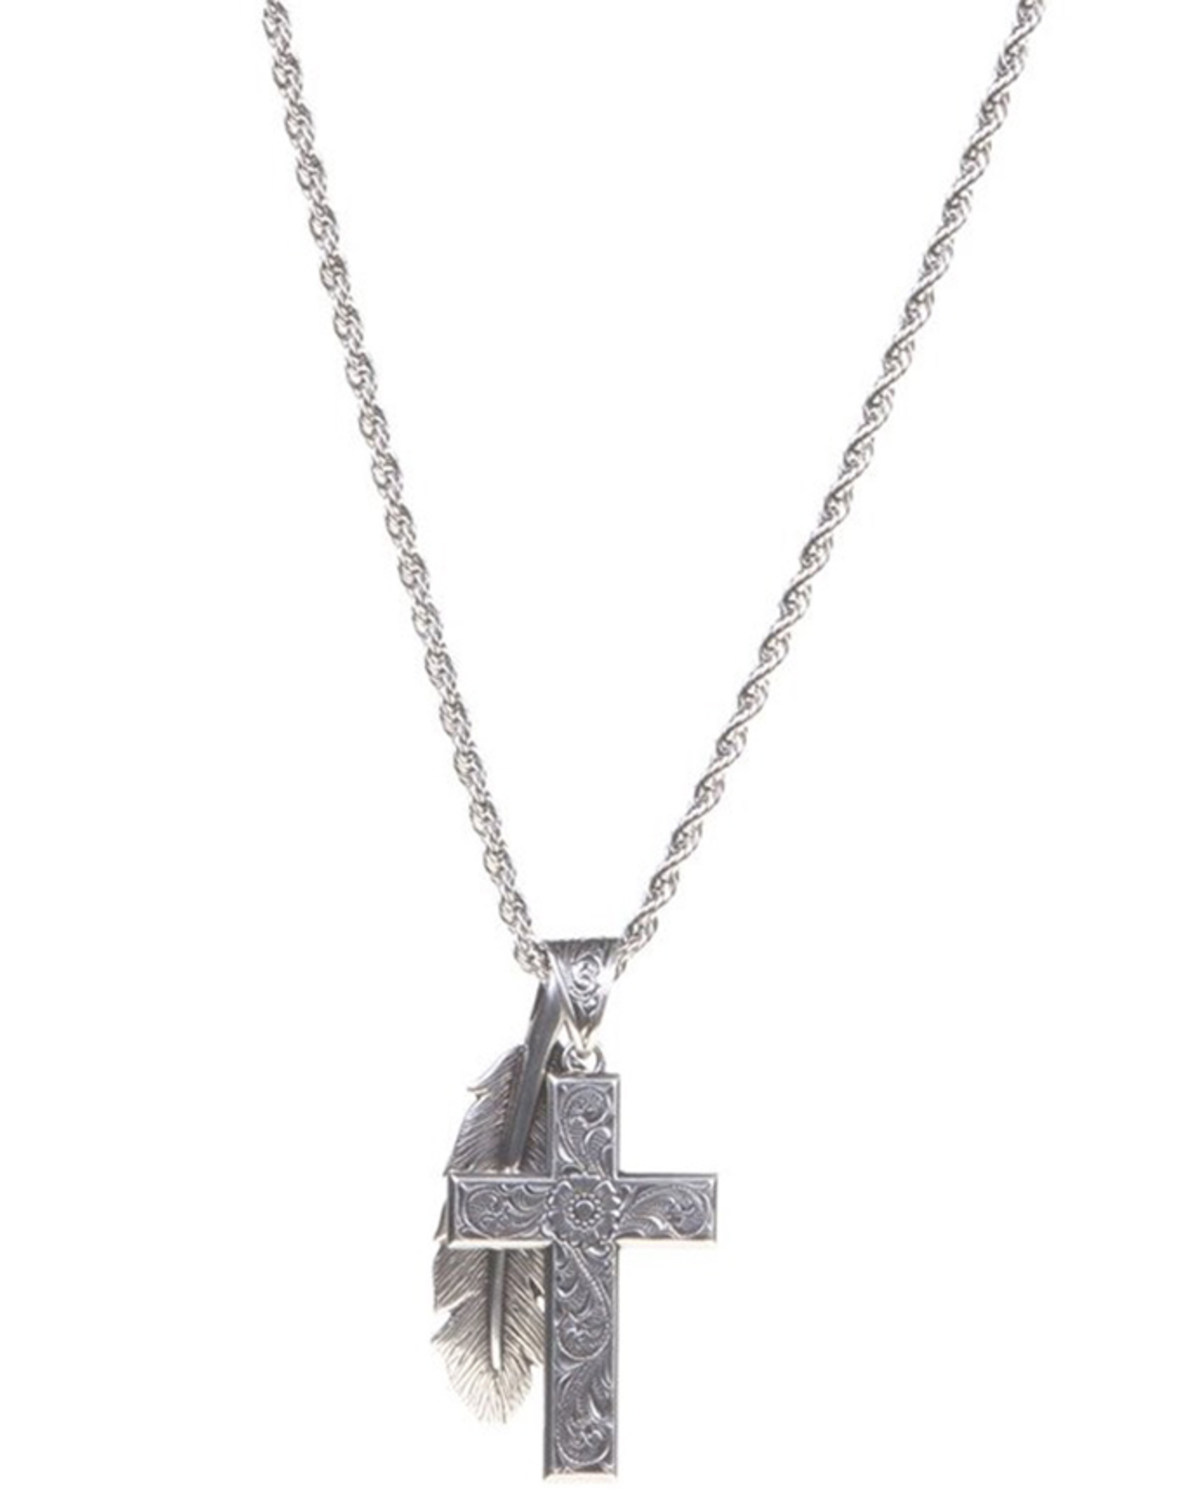 Twister Men's Silver Cross and Feather Pendant Necklace